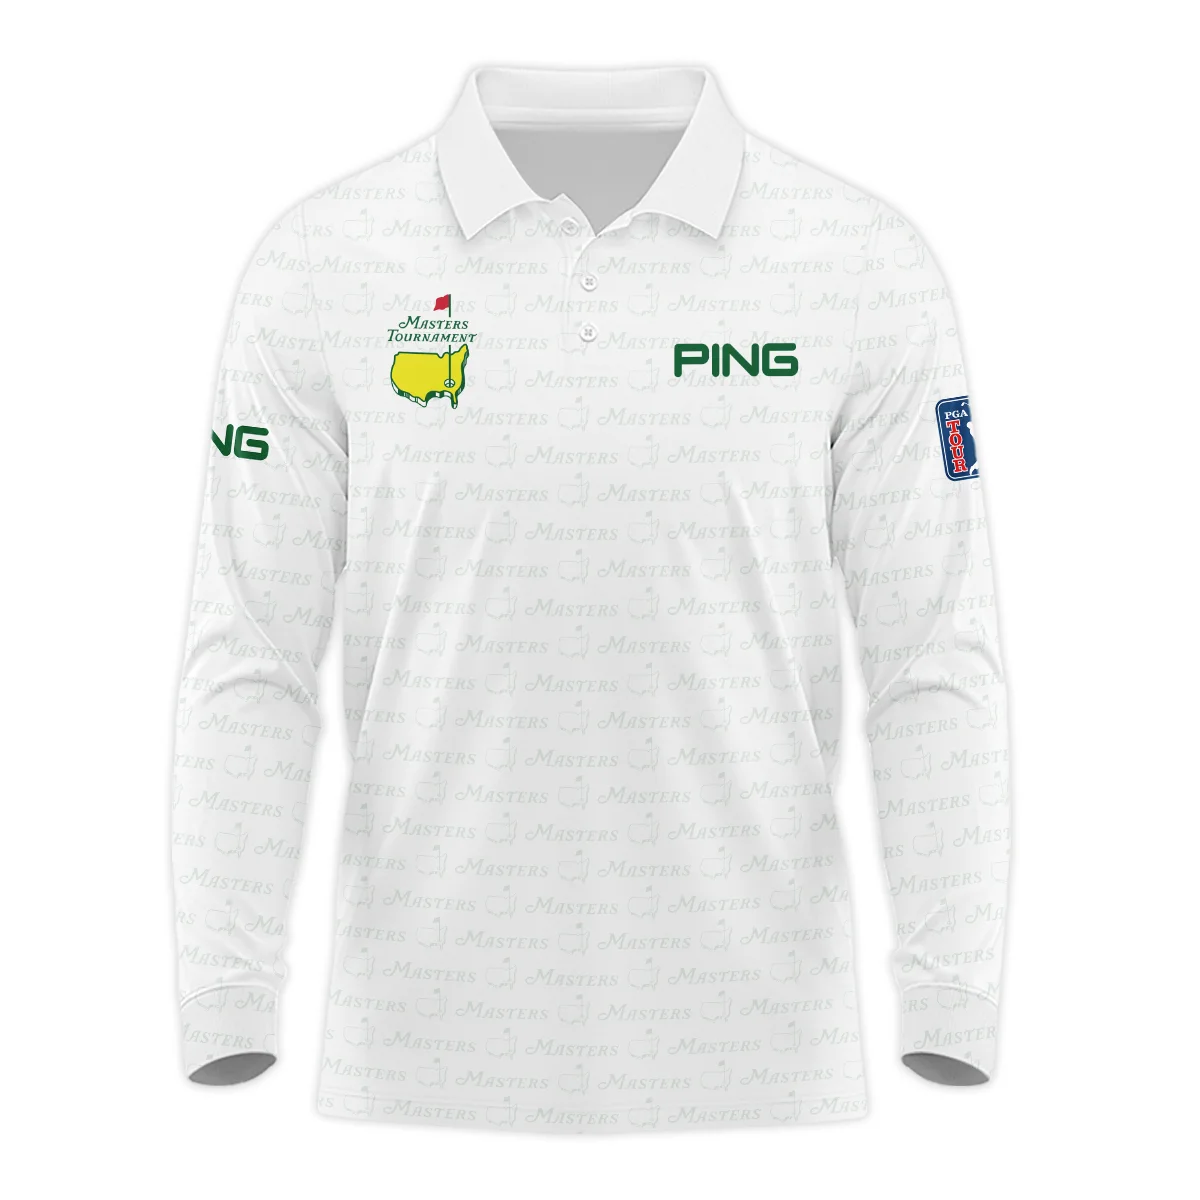 Golf Pattern Cup White Mix Green Masters Tournament Ping Hoodie Shirt Style Classic Hoodie Shirt